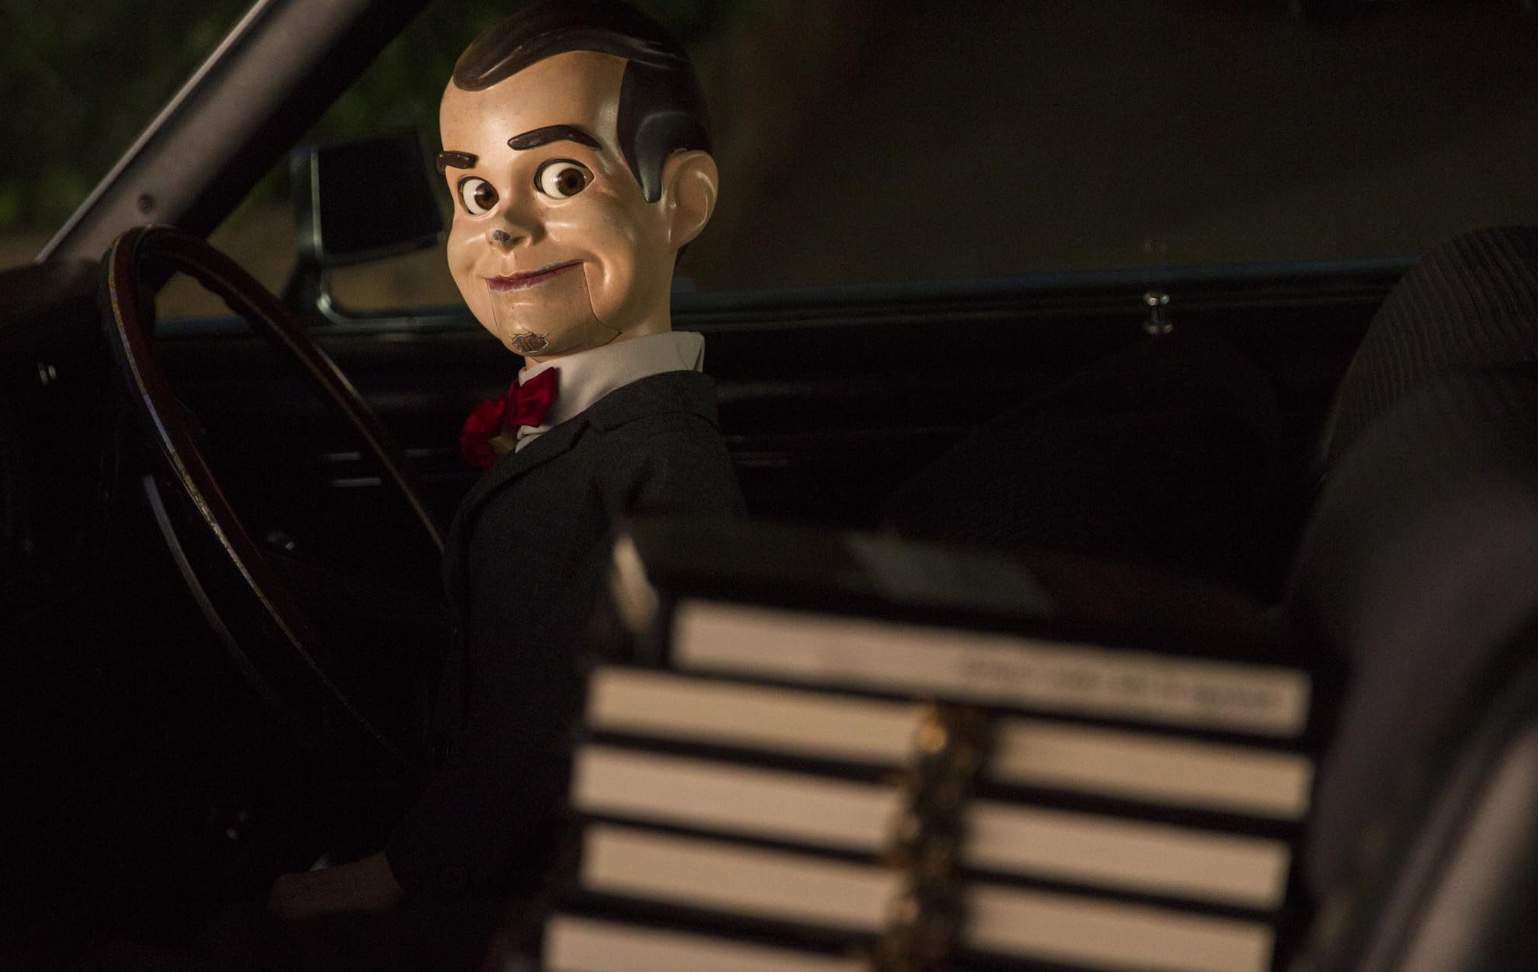 A ventriloquist dummy sits behind the wheel of a car in this image from Columbia Pictures.